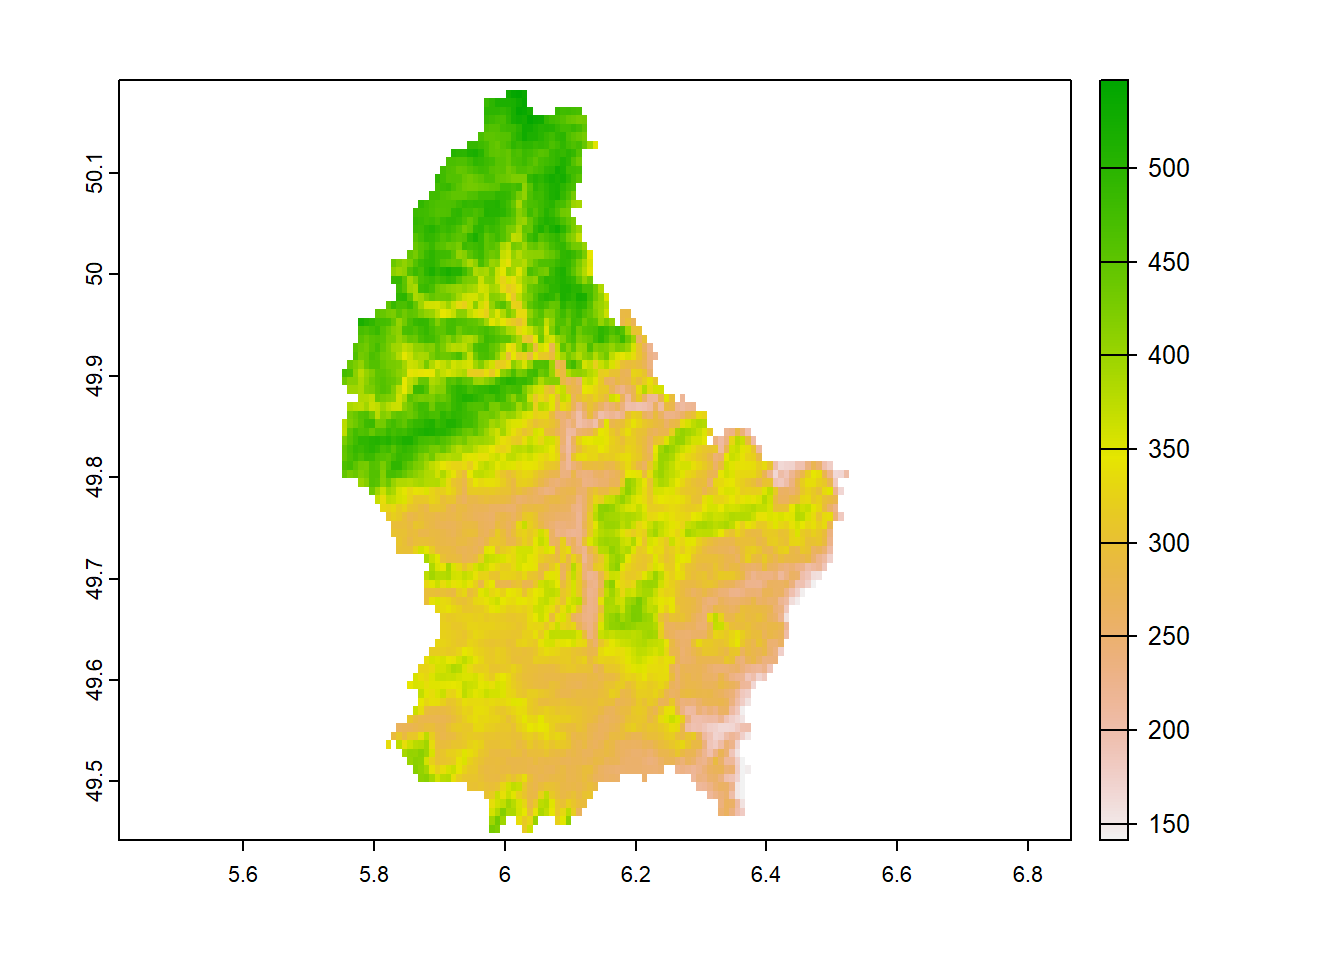 Elevation raster in Luxembourg obtained from **terra**.